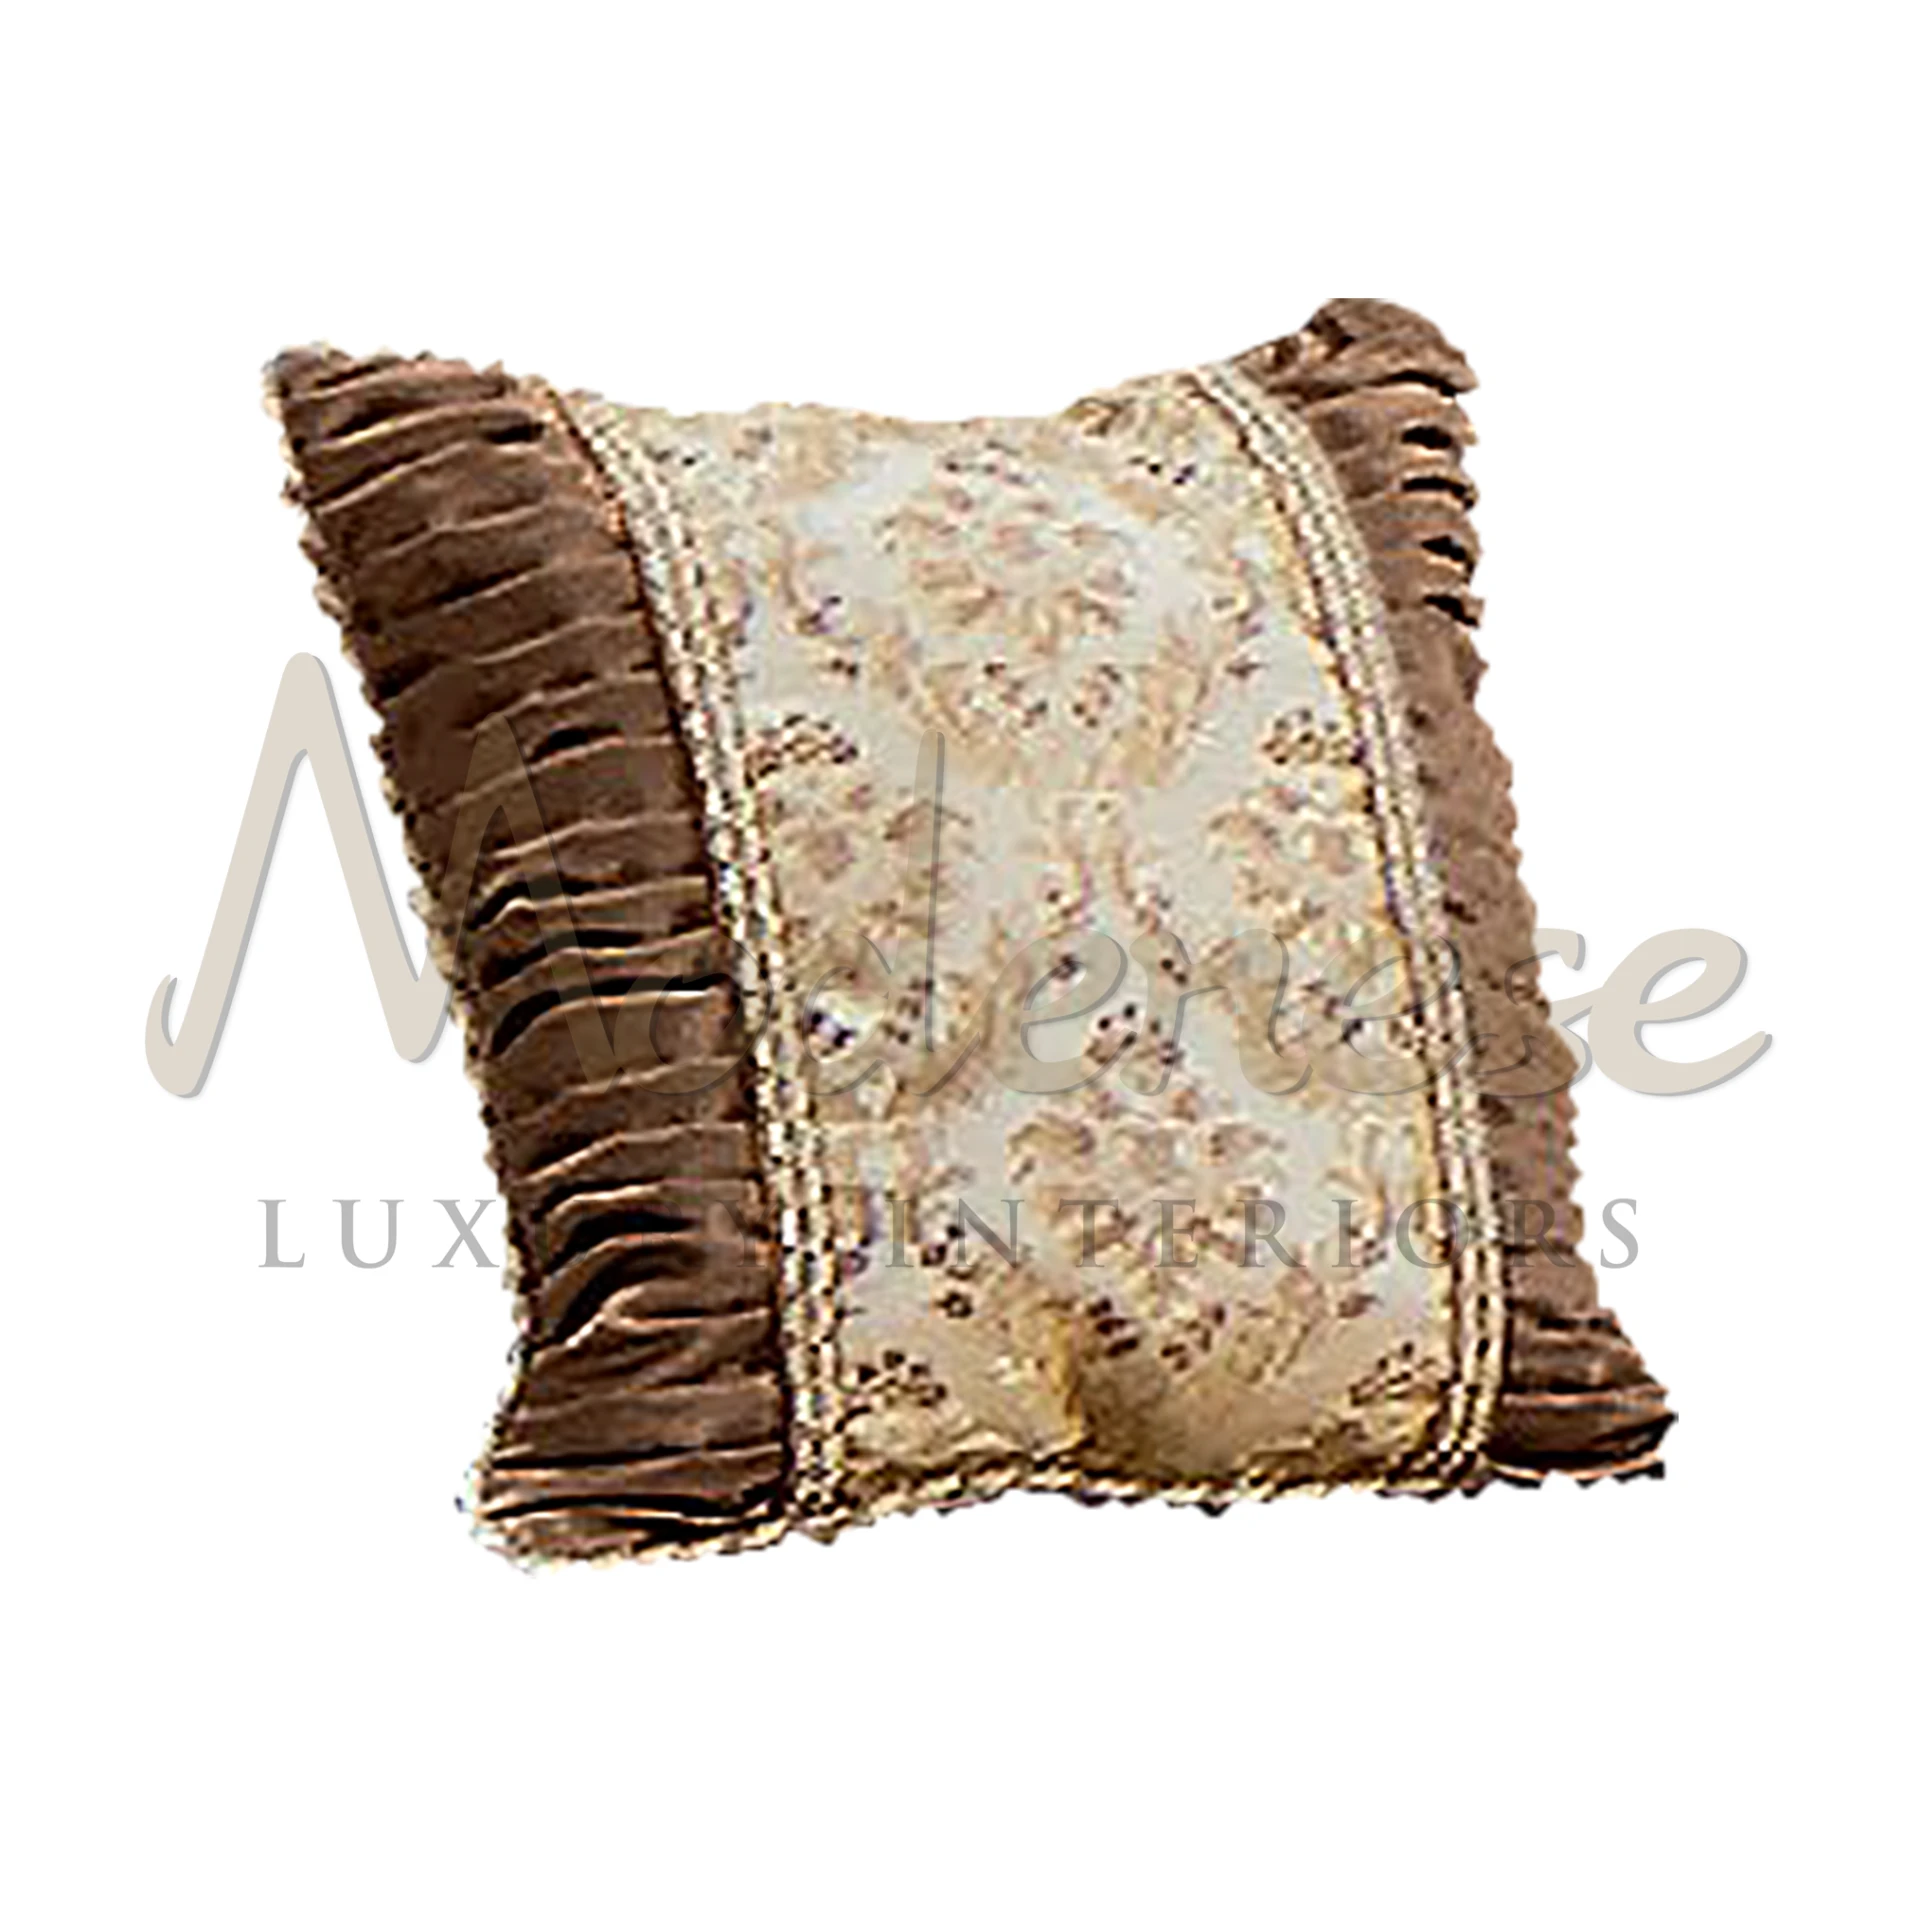 Royal Beige Pillow on a regal sofa, exuding royal beauty and refined elegance, transforming the room into a noble setting.